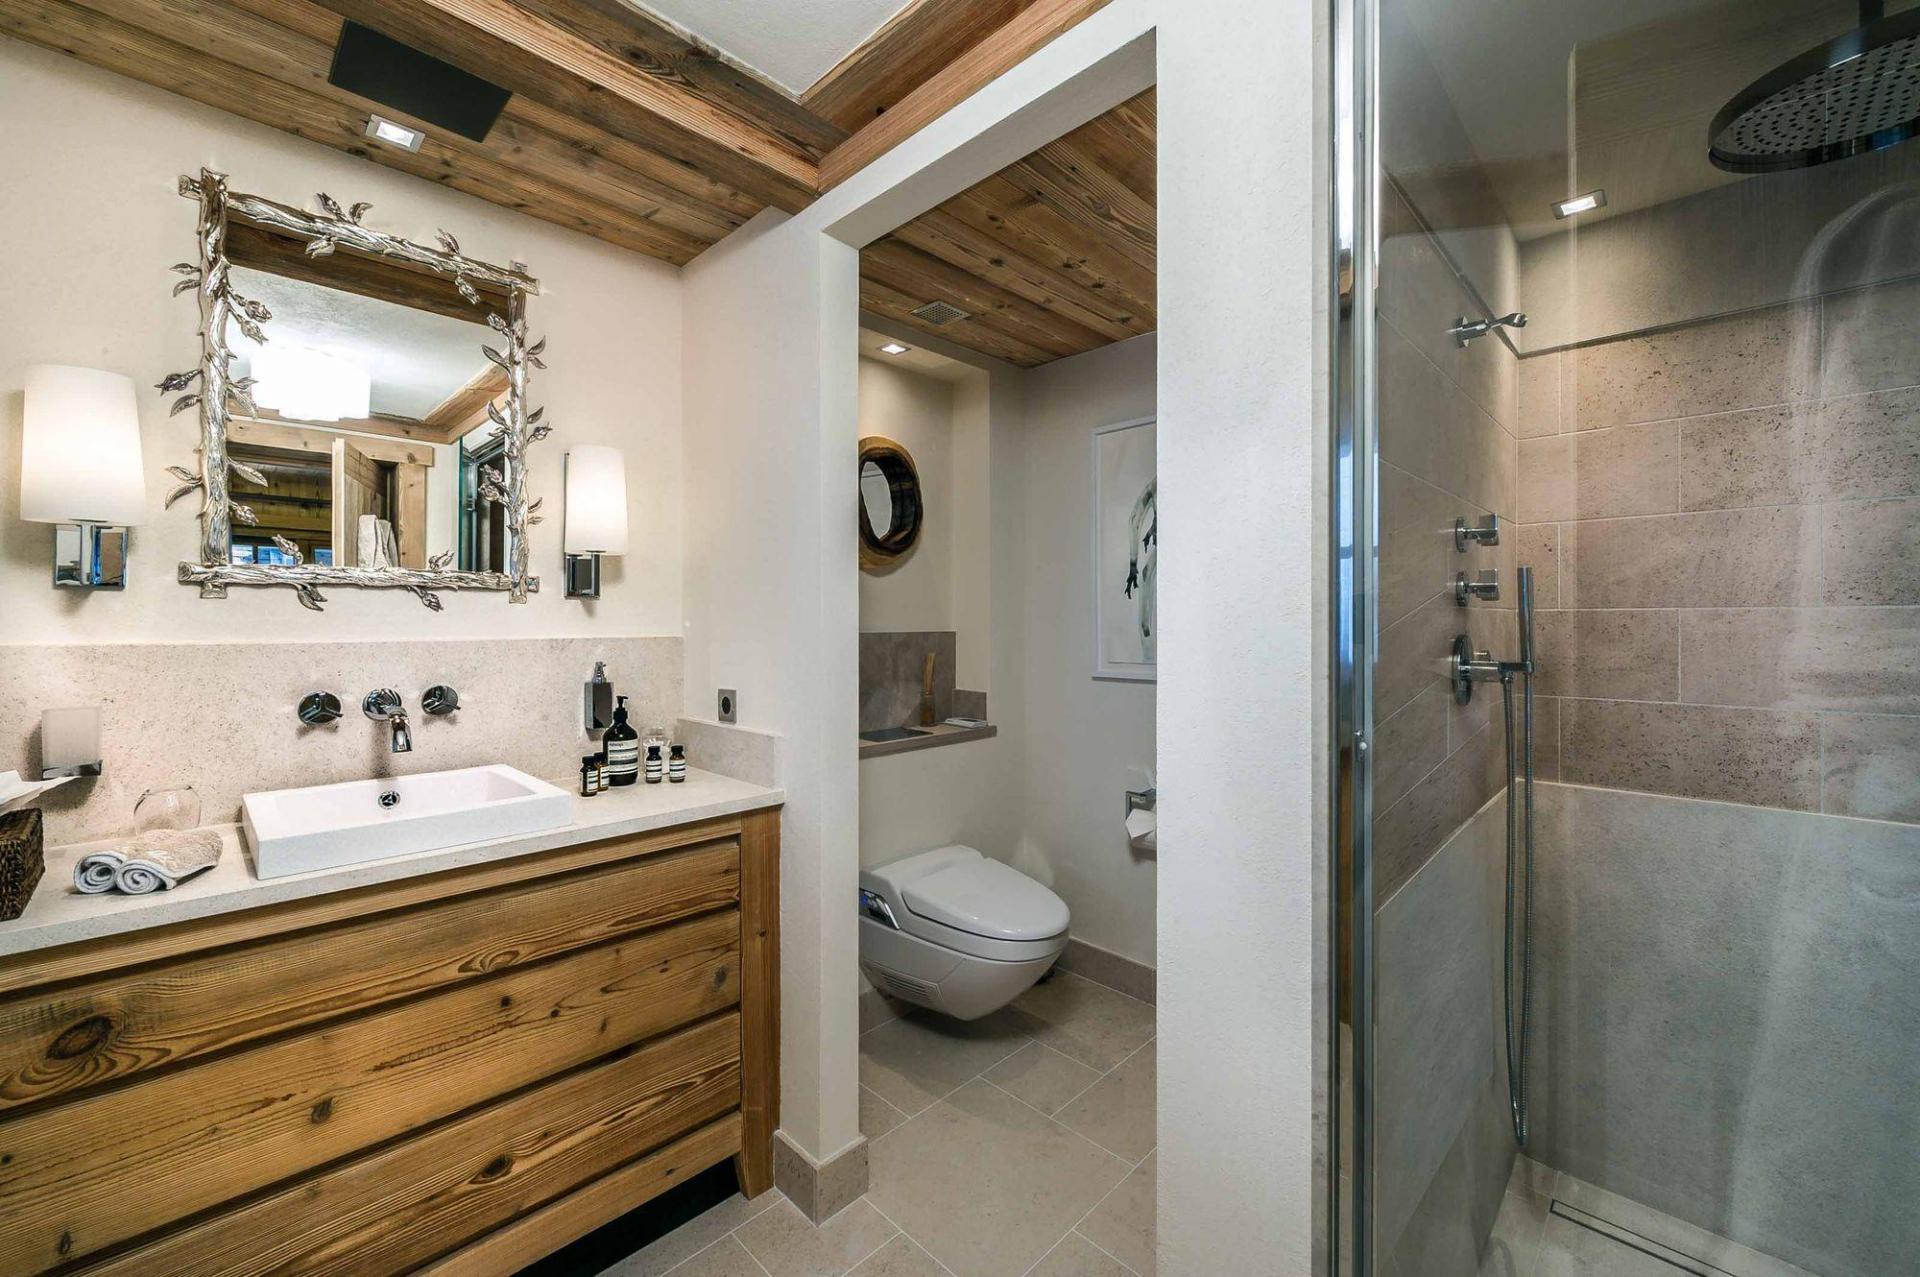 A SHOWER ROOM IN A CHALET RENTAL IN COURCHEVEL